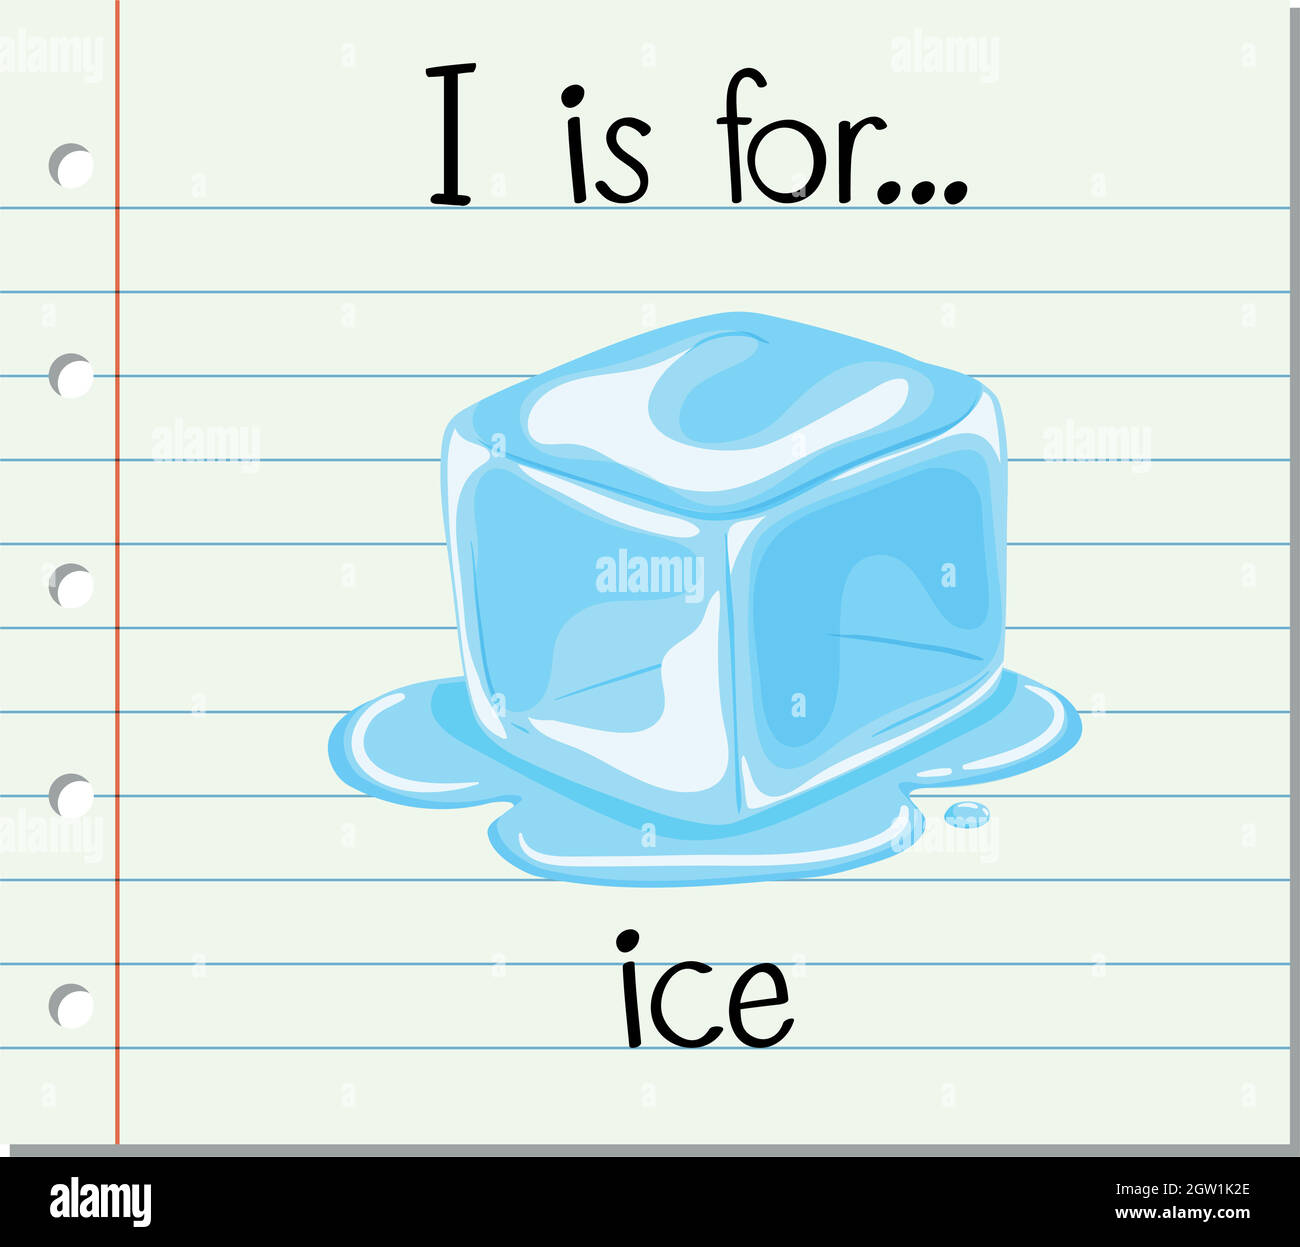 Flashcard letter I is for ice Stock Vector